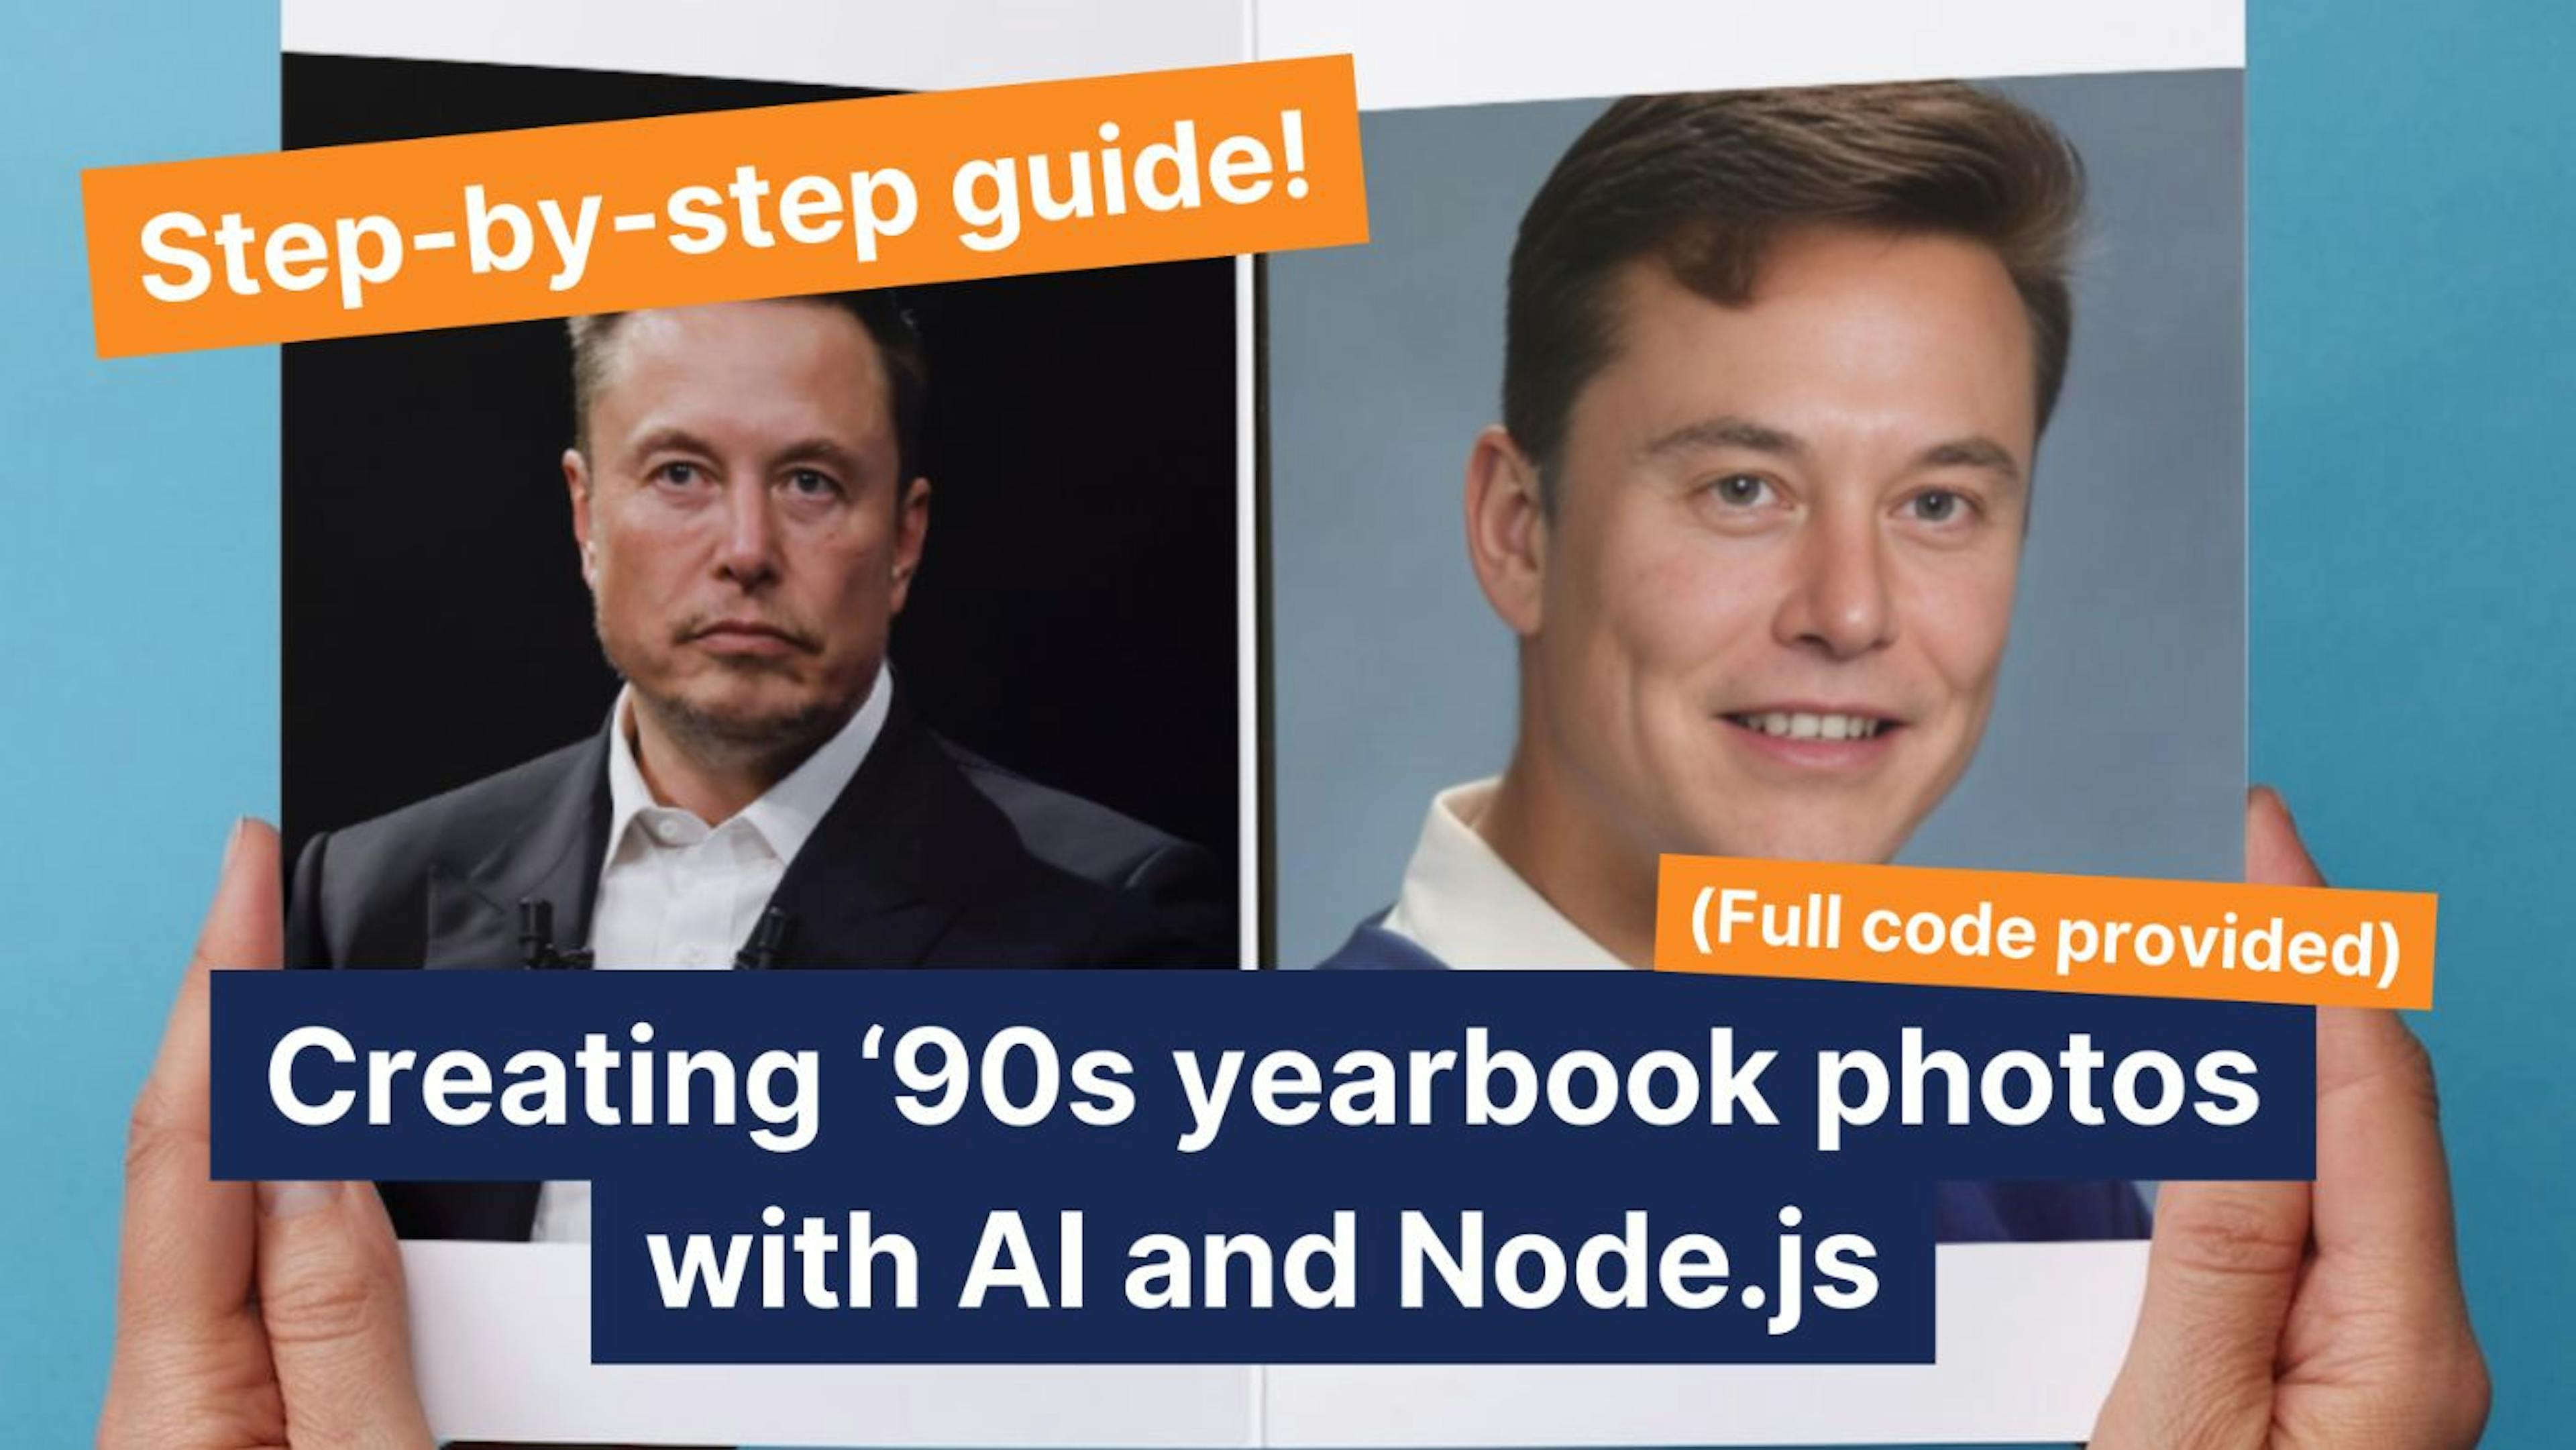 /embracing-nostalgia-building-a-retro-yearbook-photo-changer-with-nodejs-and-ai feature image